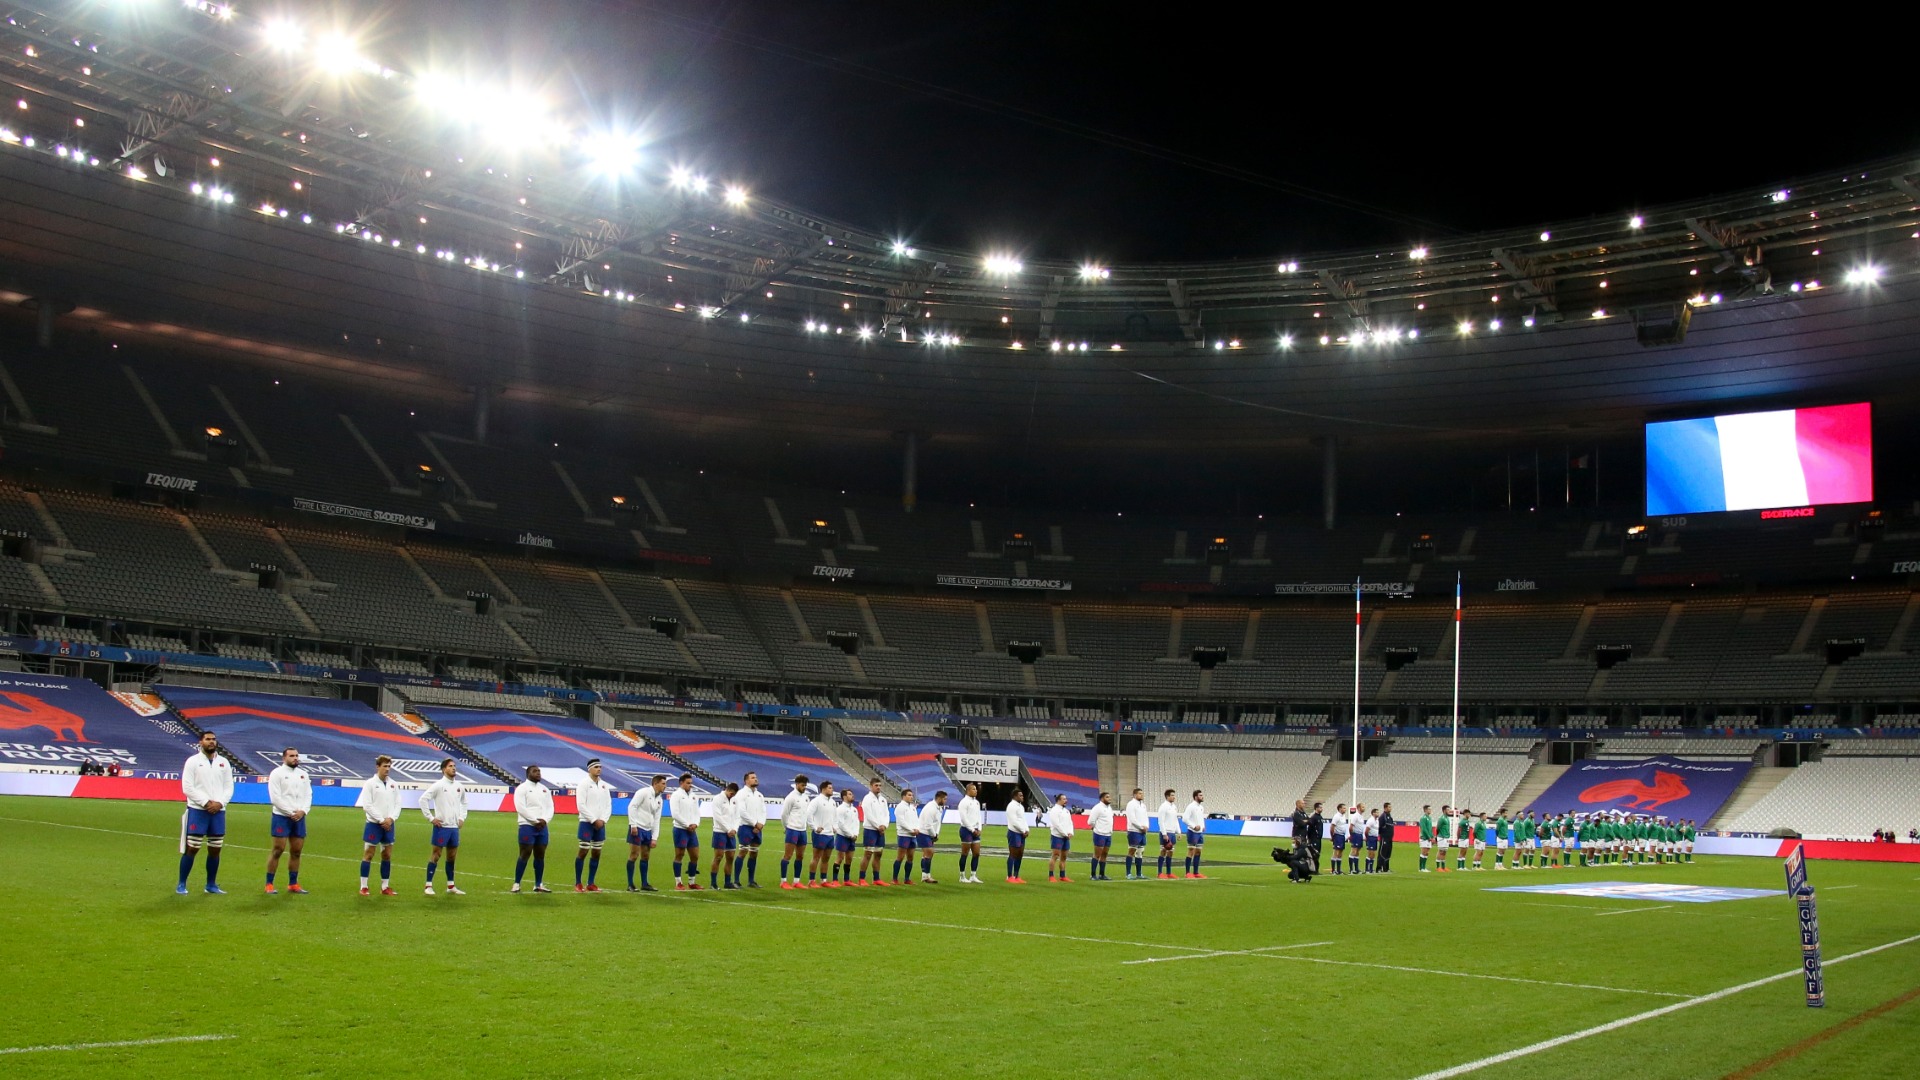 There have been no more positive COVID-19 tests in the France squad over the past two days, so they are set to take on Scotland in Paris.